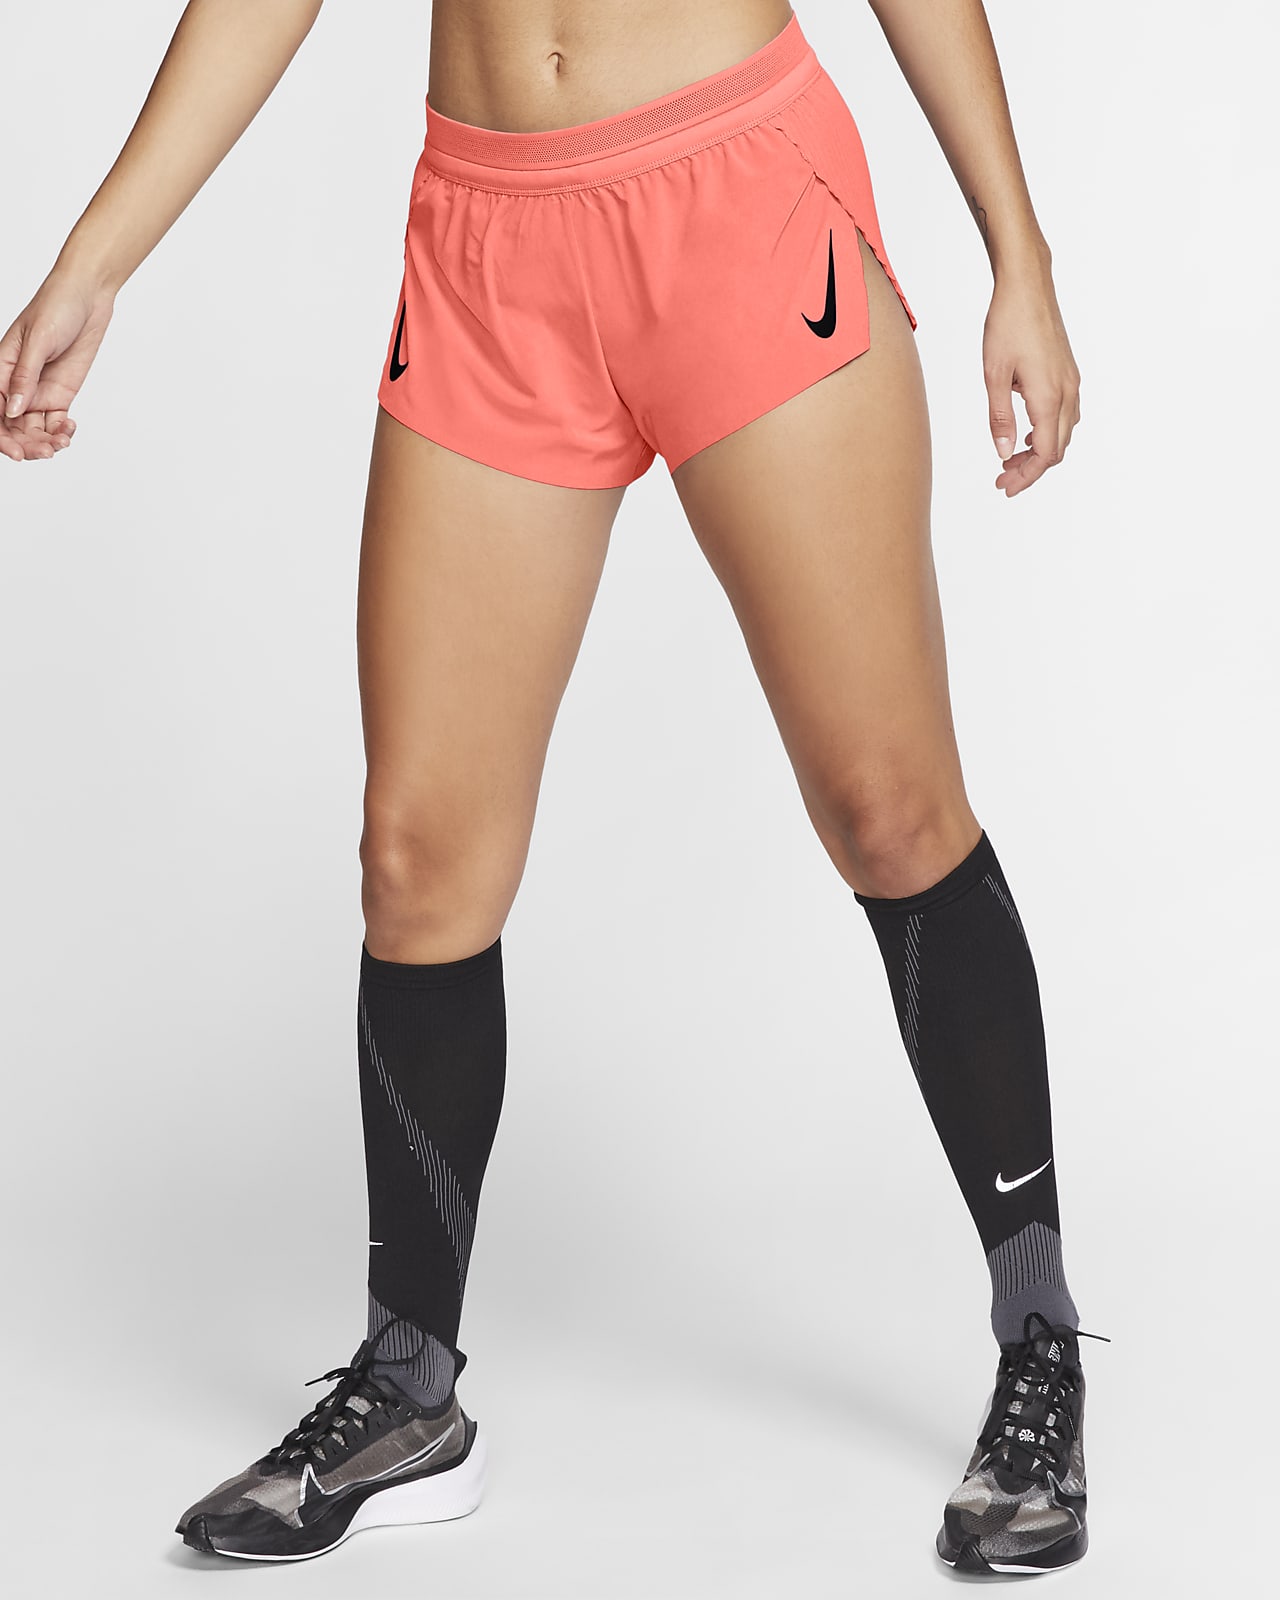 nike womens running shorts with spandex